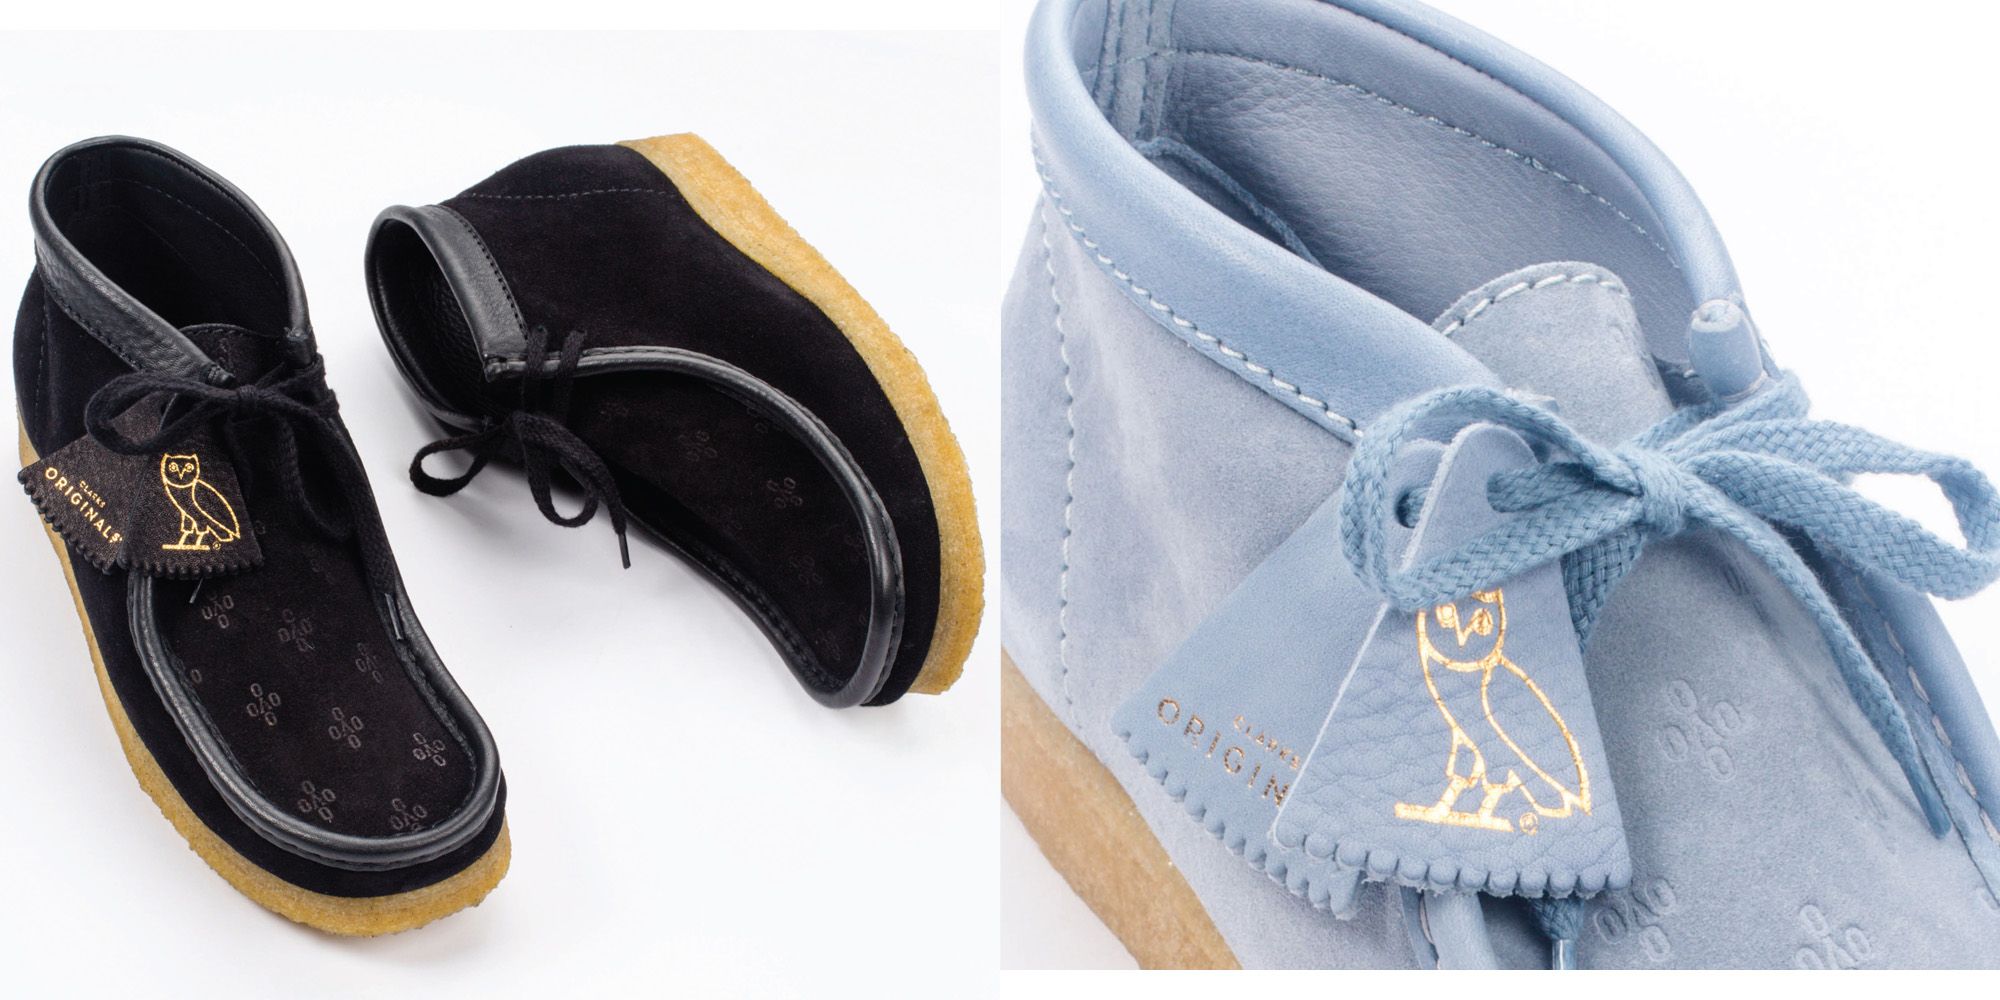 Drake and OVO Just Dropped Clarks Wallabees for Guys With Champagne Taste